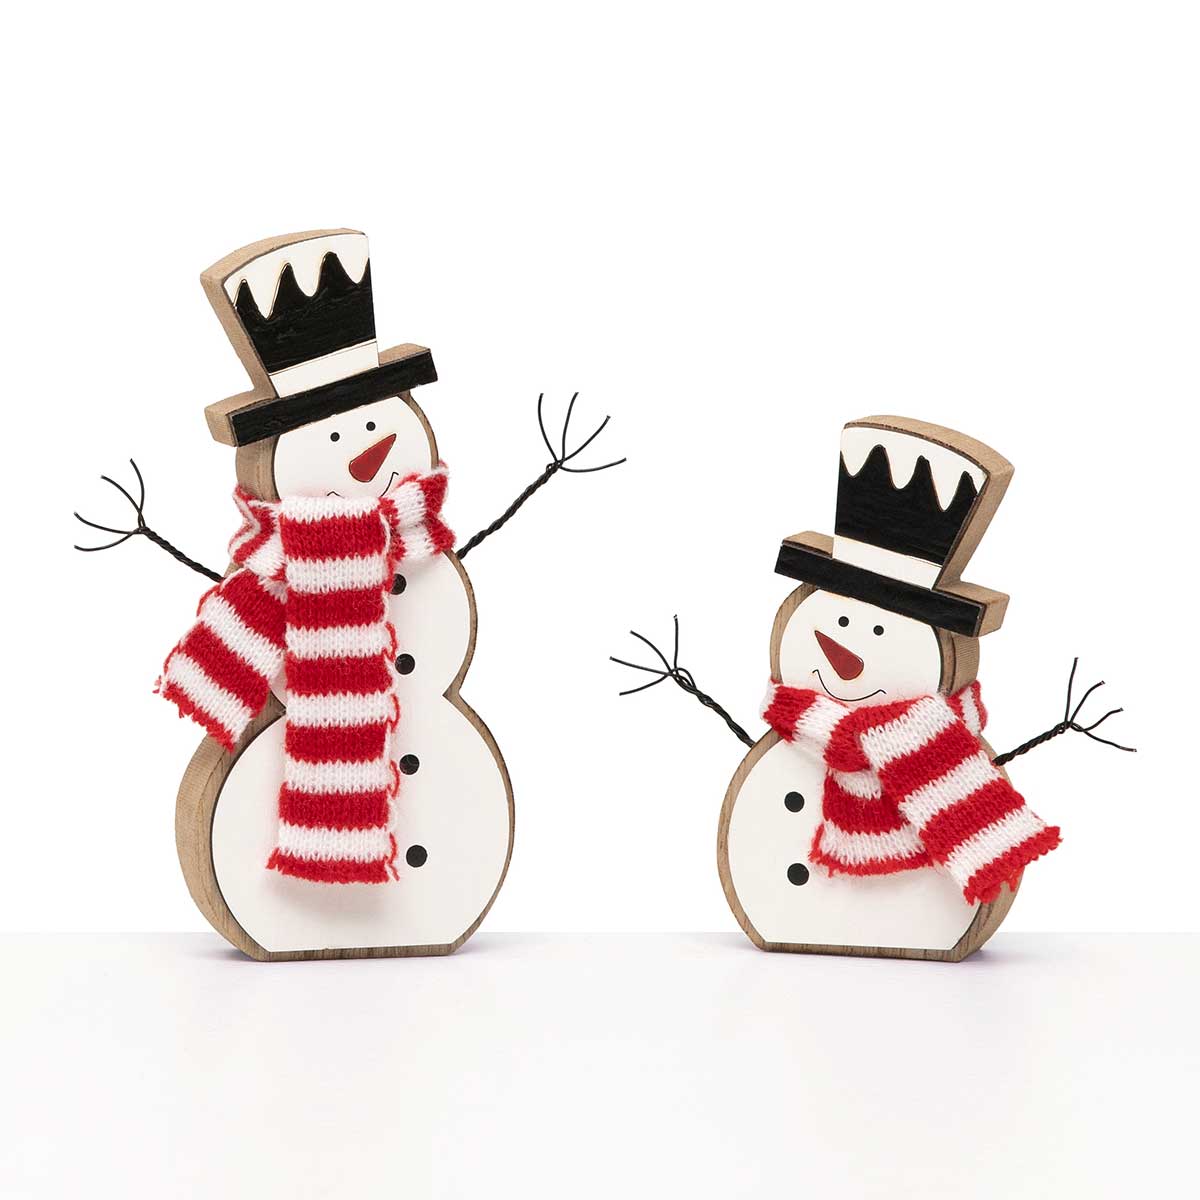 SIT-A-BOUT SNOWMAN SMALL 4.5IN X 1IN X 4.5IN WHITE/RED/BLACK